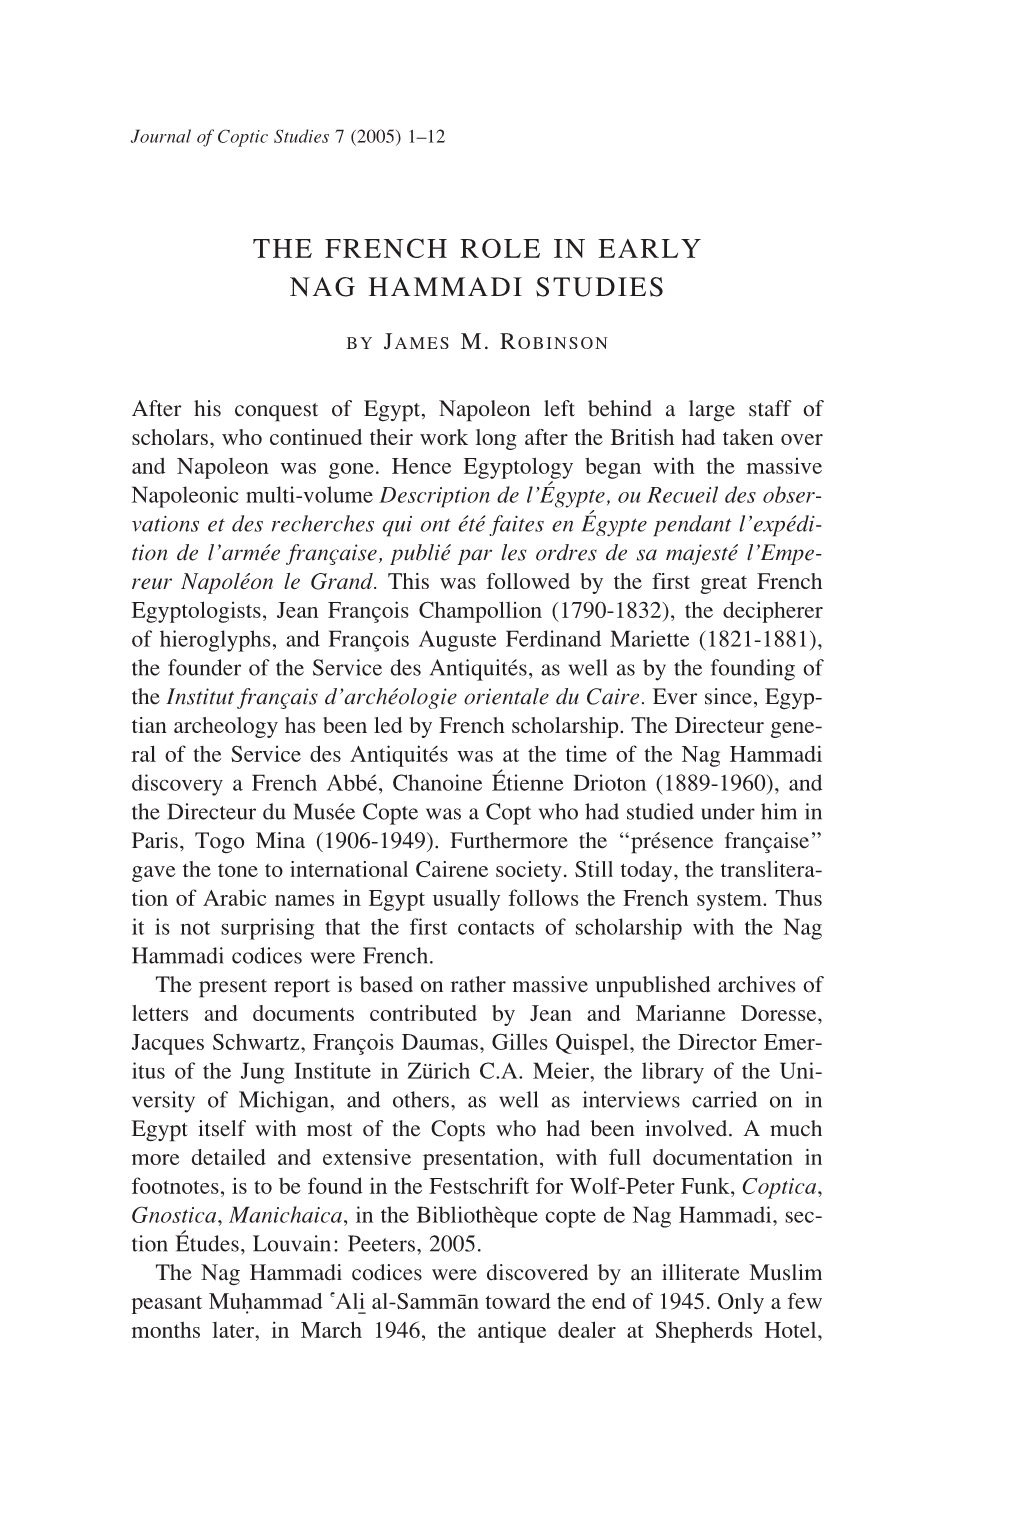 The French Role in Early Nag Hammadi Studies